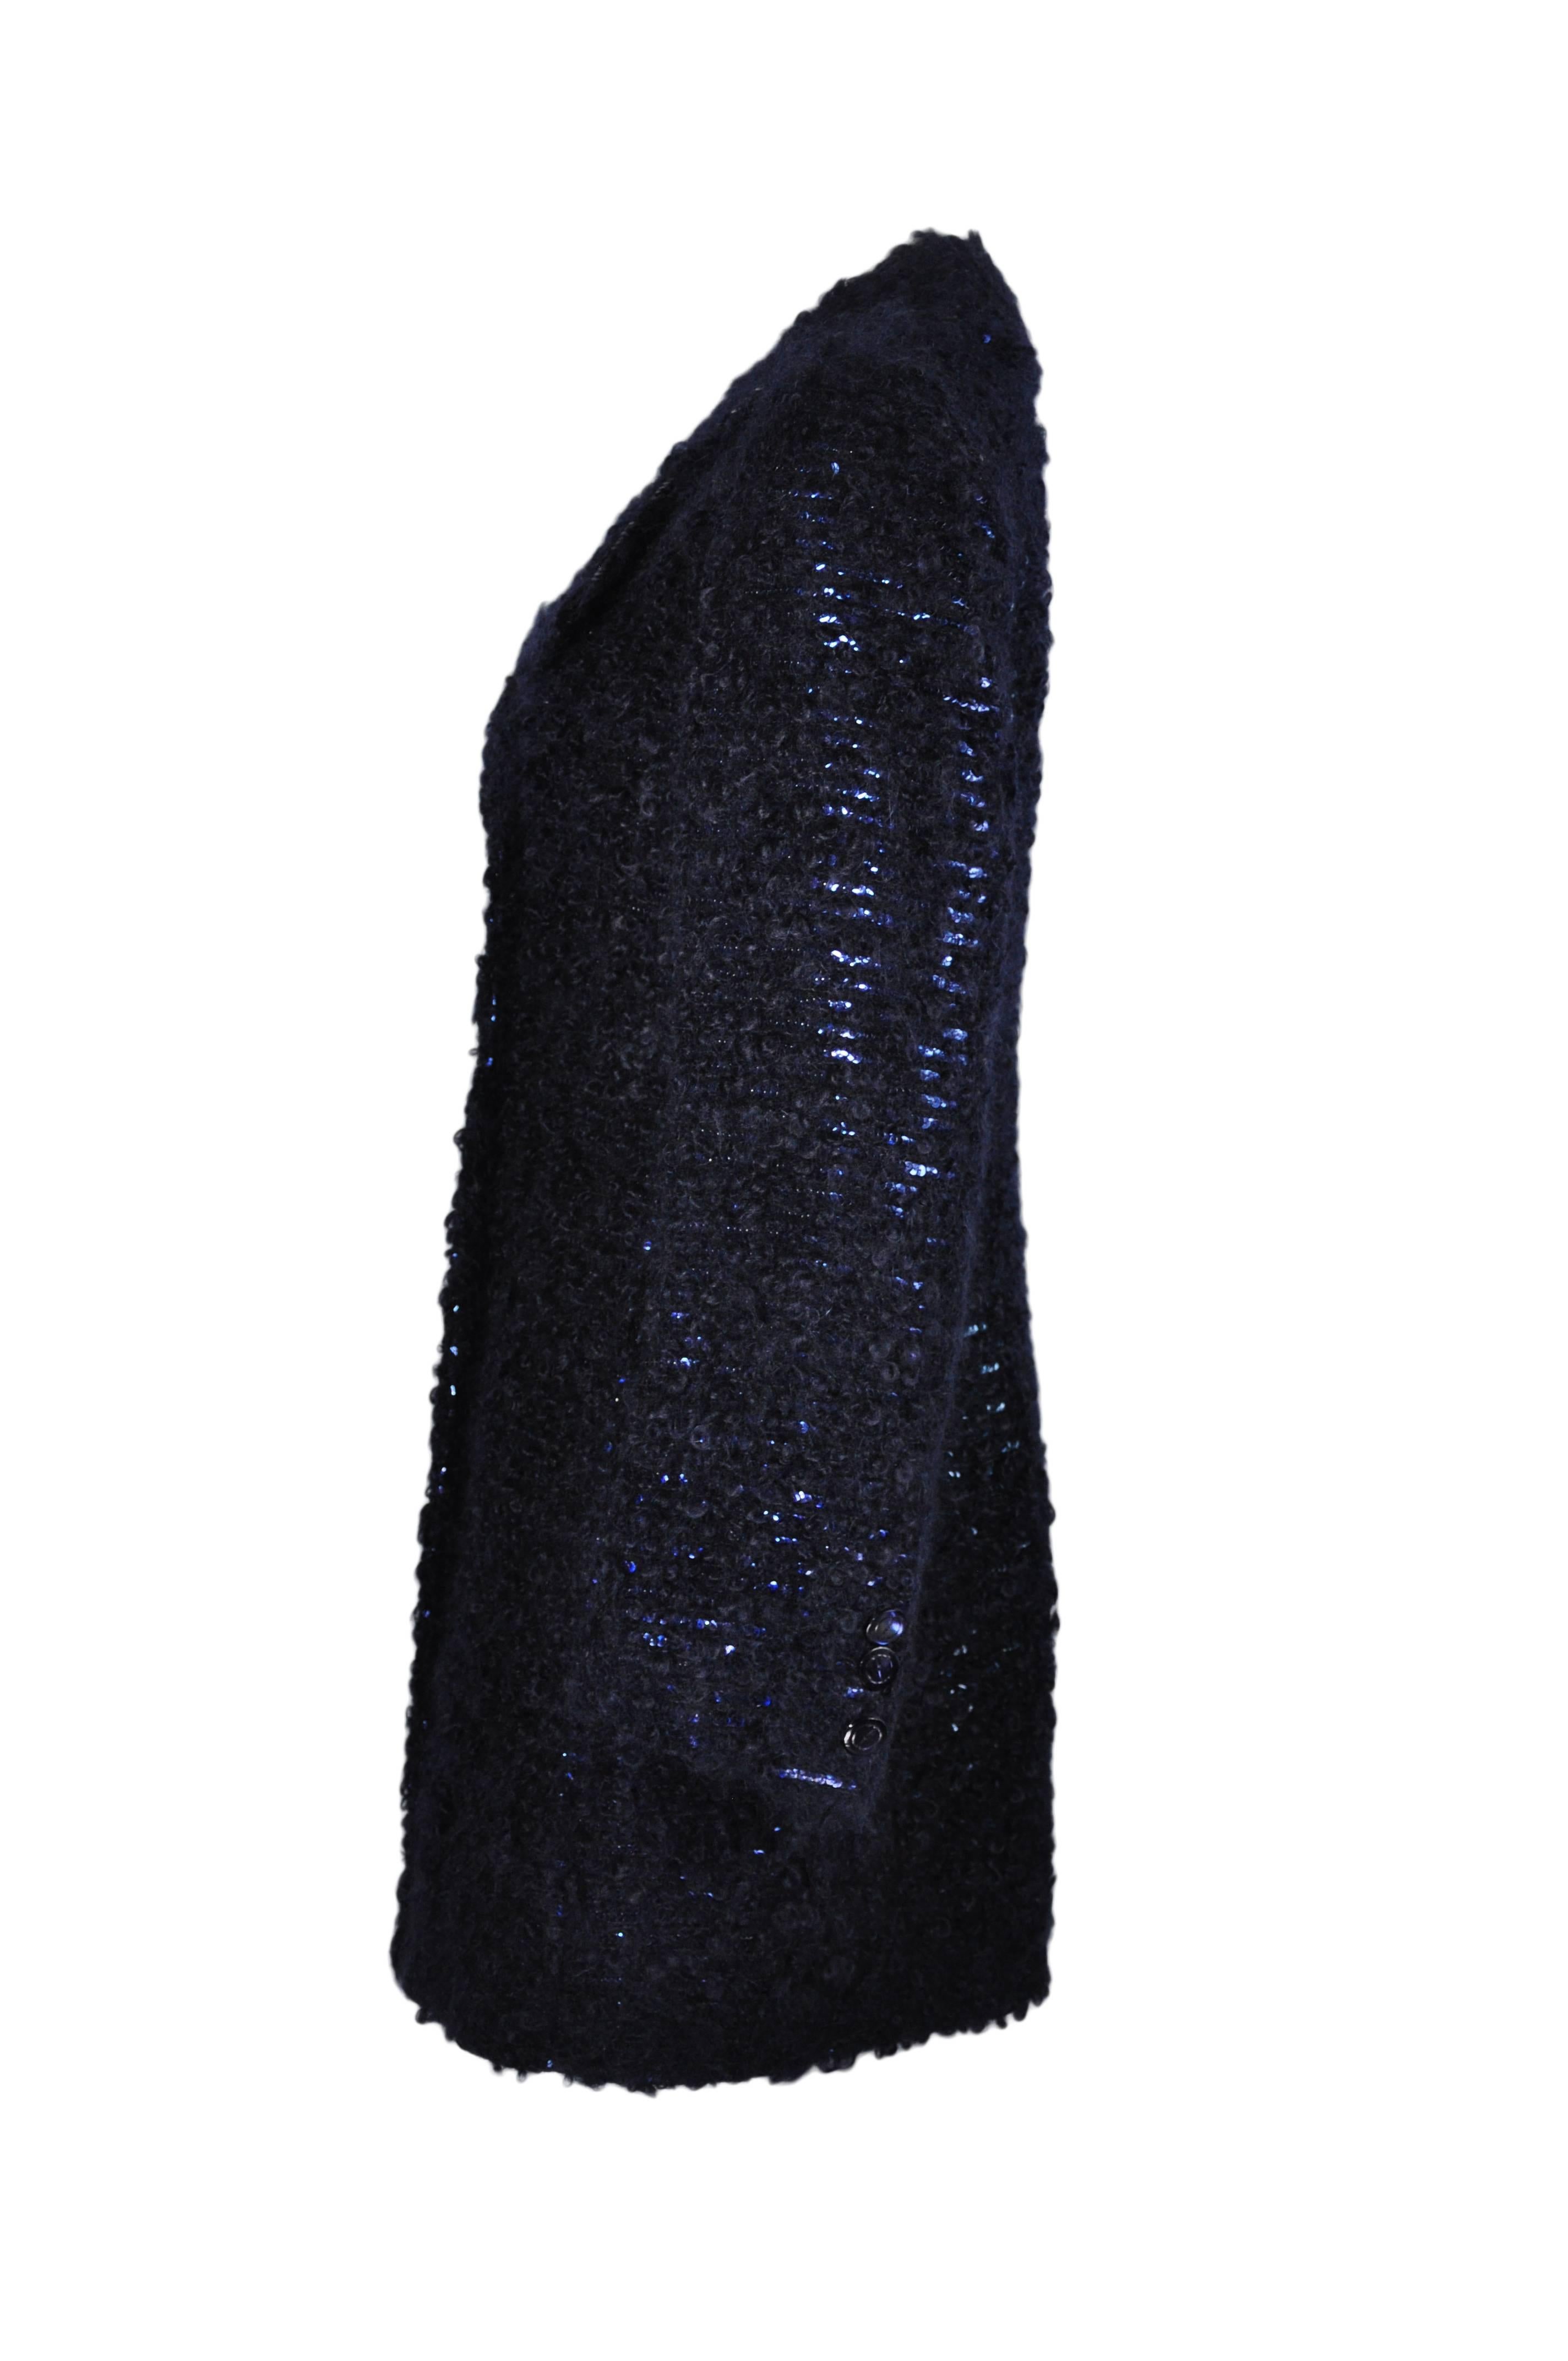  Tom Ford for Gucci 90'S Rare Navy Fully Sequined Mohair Coat In Excellent Condition For Sale In Hong Kong, Hong Kong